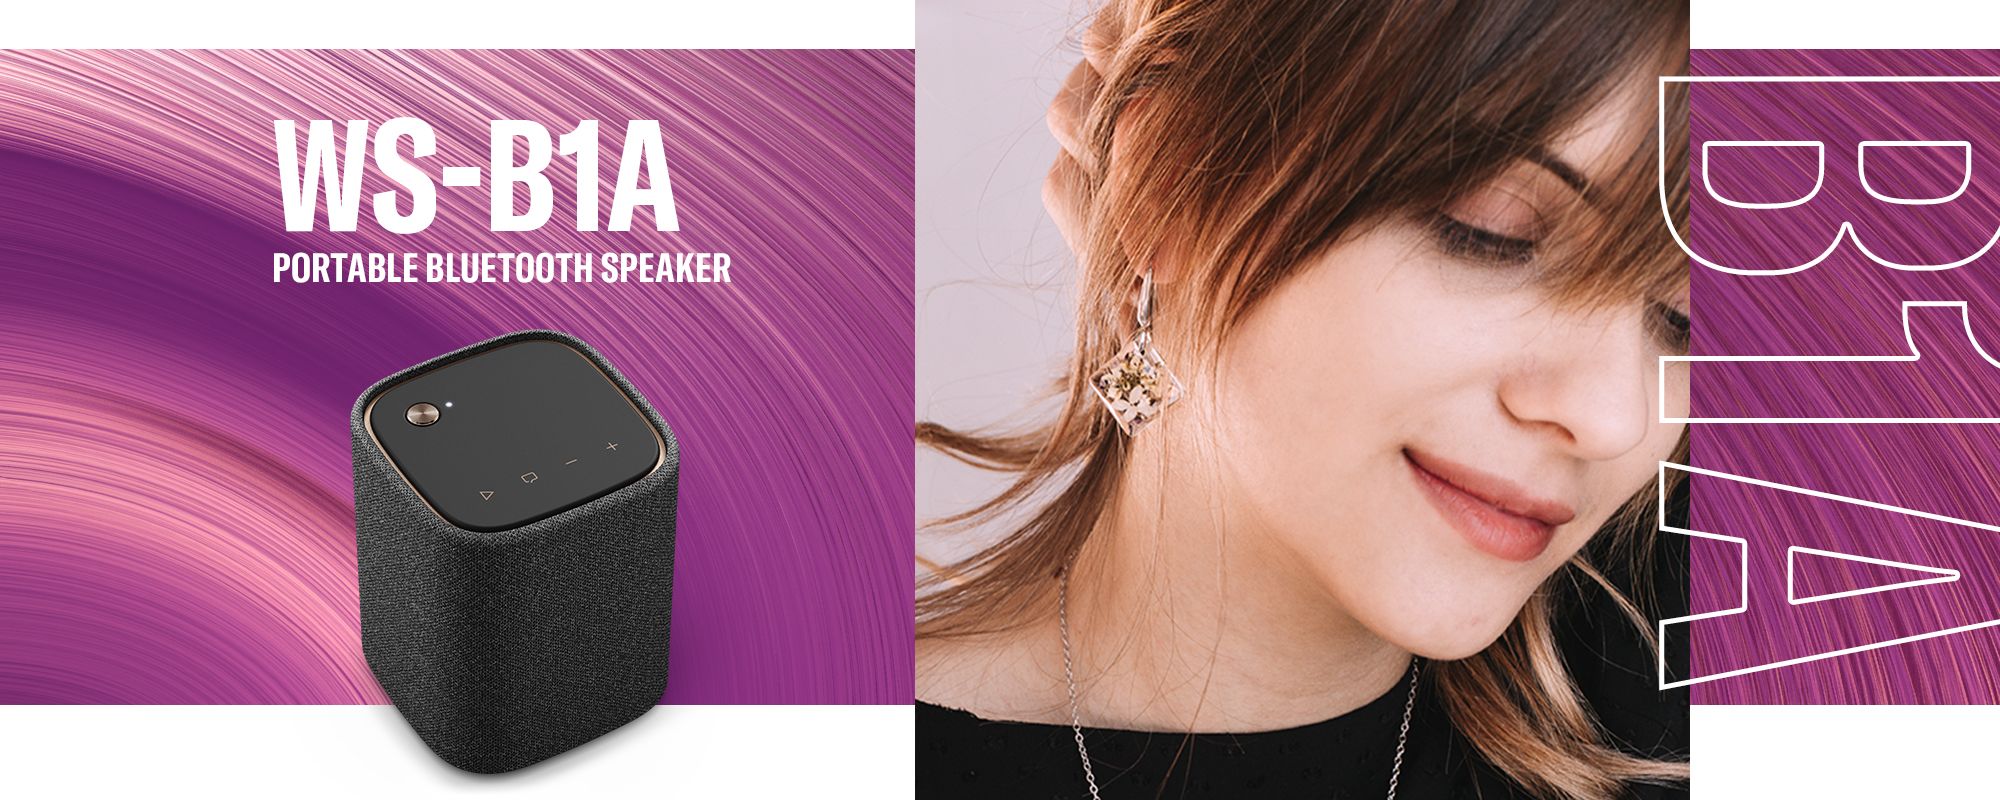 WS-B1A Overview Wireless Speaker Audio  Visual Products Yamaha  Other European Countries